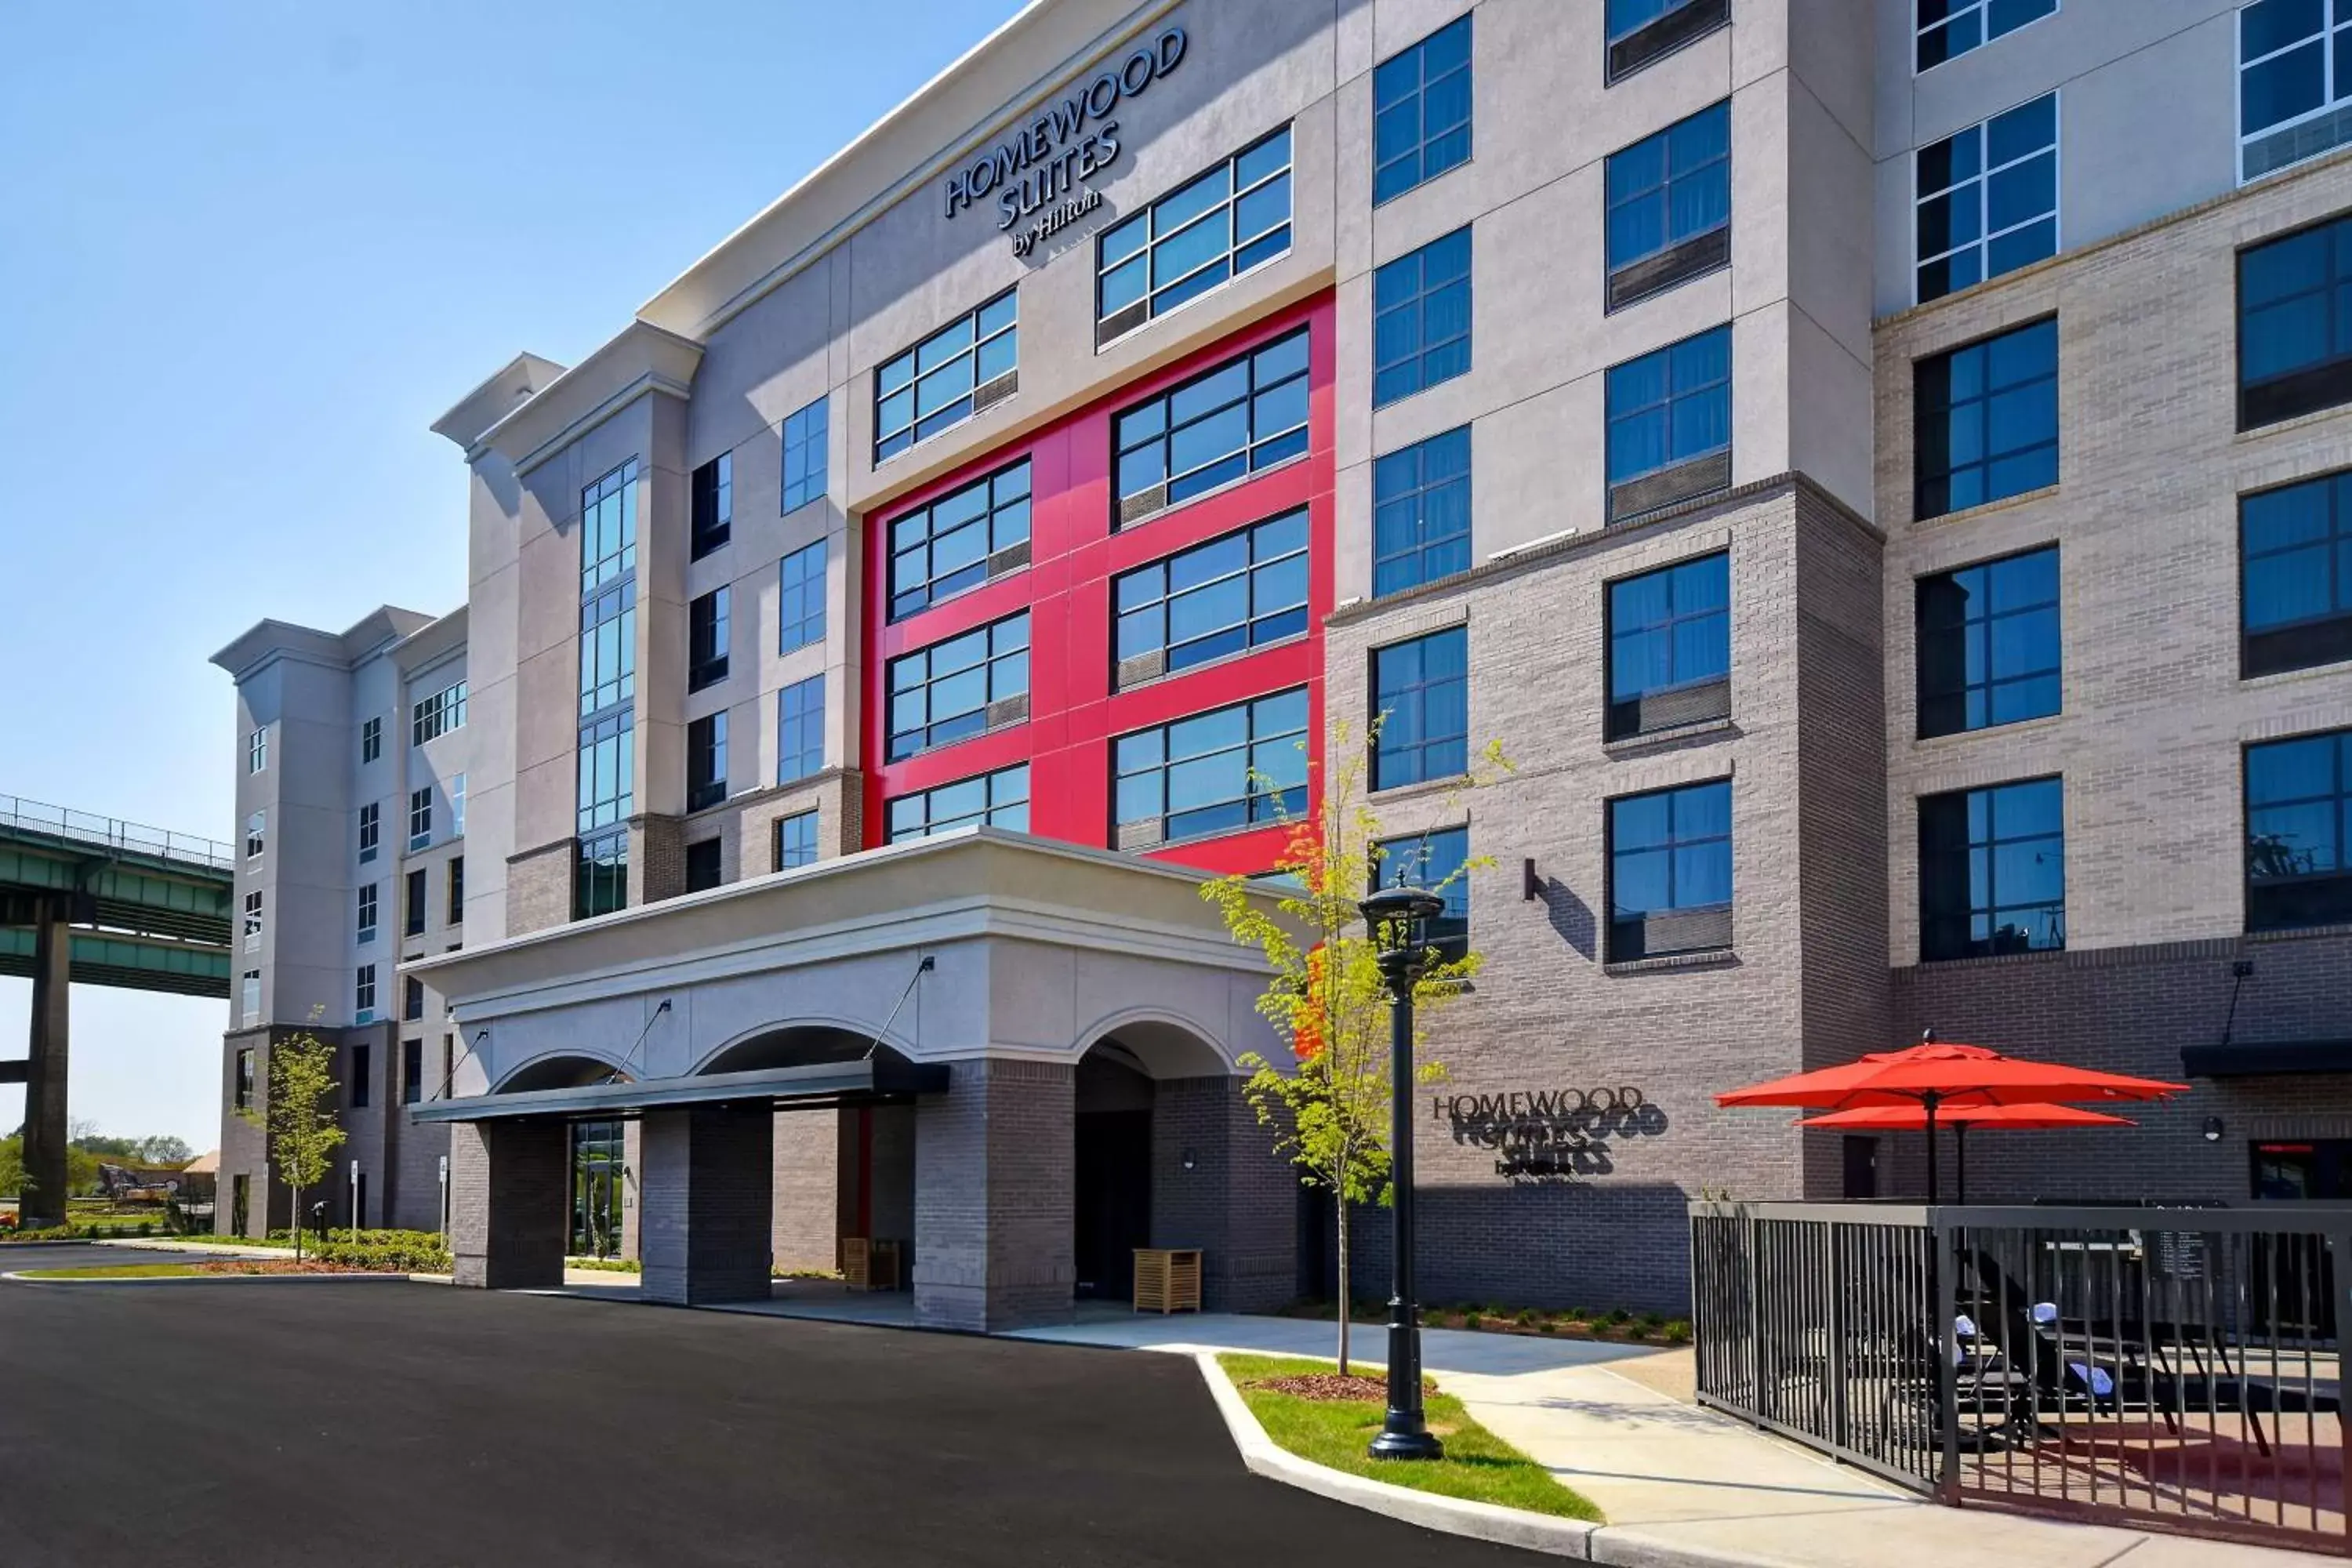 Property Building in Homewood Suites by Hilton Tuscaloosa Downtown, AL